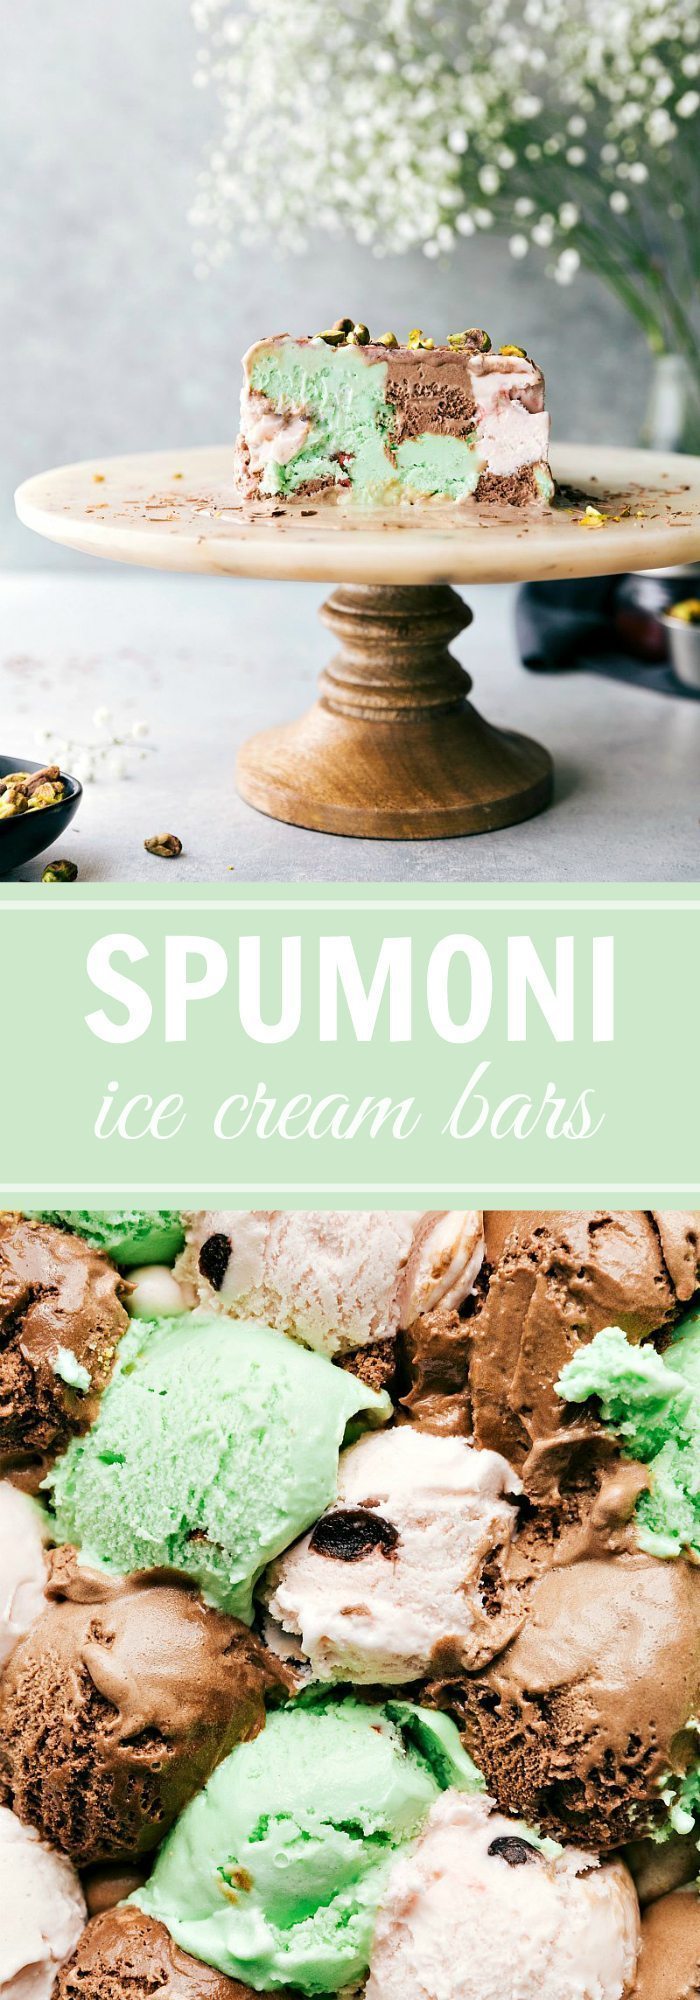 SPUMONI ICE CREAM TERRINE! Layer 3 flavors of ice cream in a bread pan and you get this amazing dessert! Plus an easy tart cherry sauce! via chelseasmessyapron.com